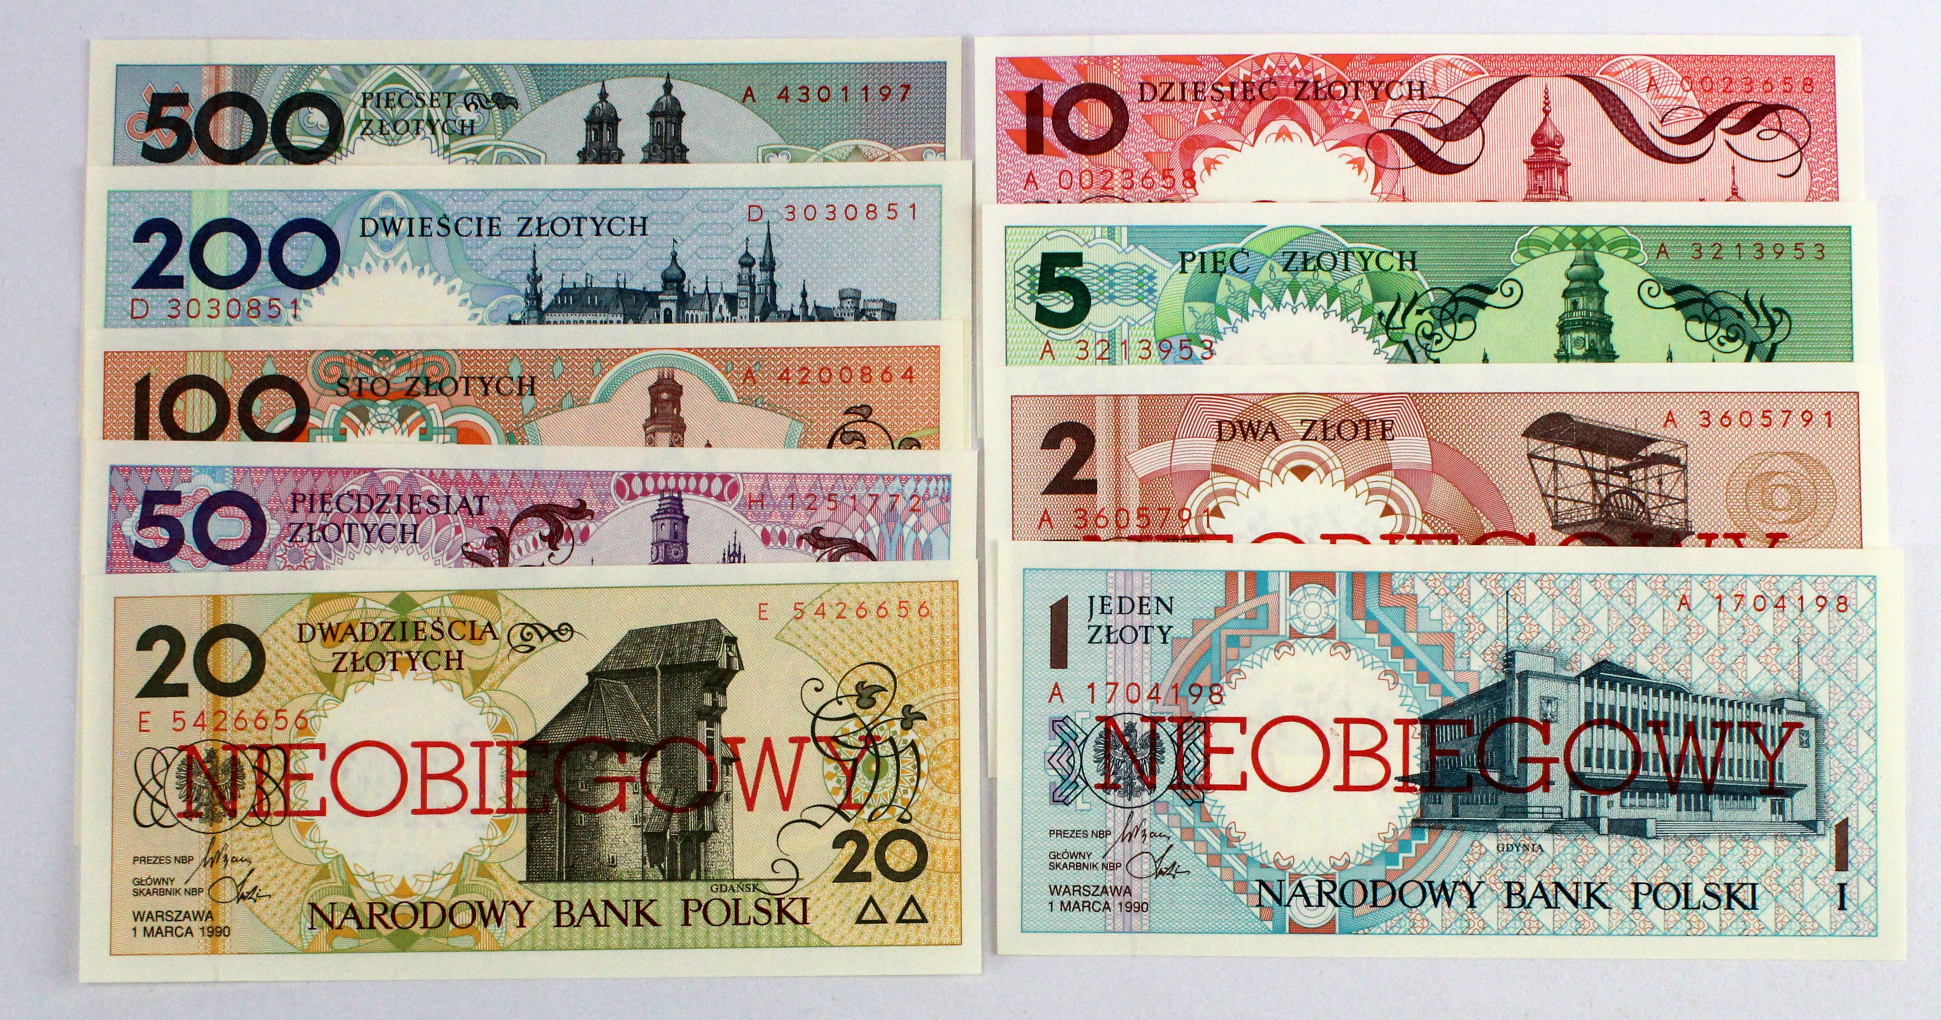 Poland (9), 1, 2, 5, 10, 20, 50, 100, 200 & 500 Zlotych issued 1st March 1990, all with red